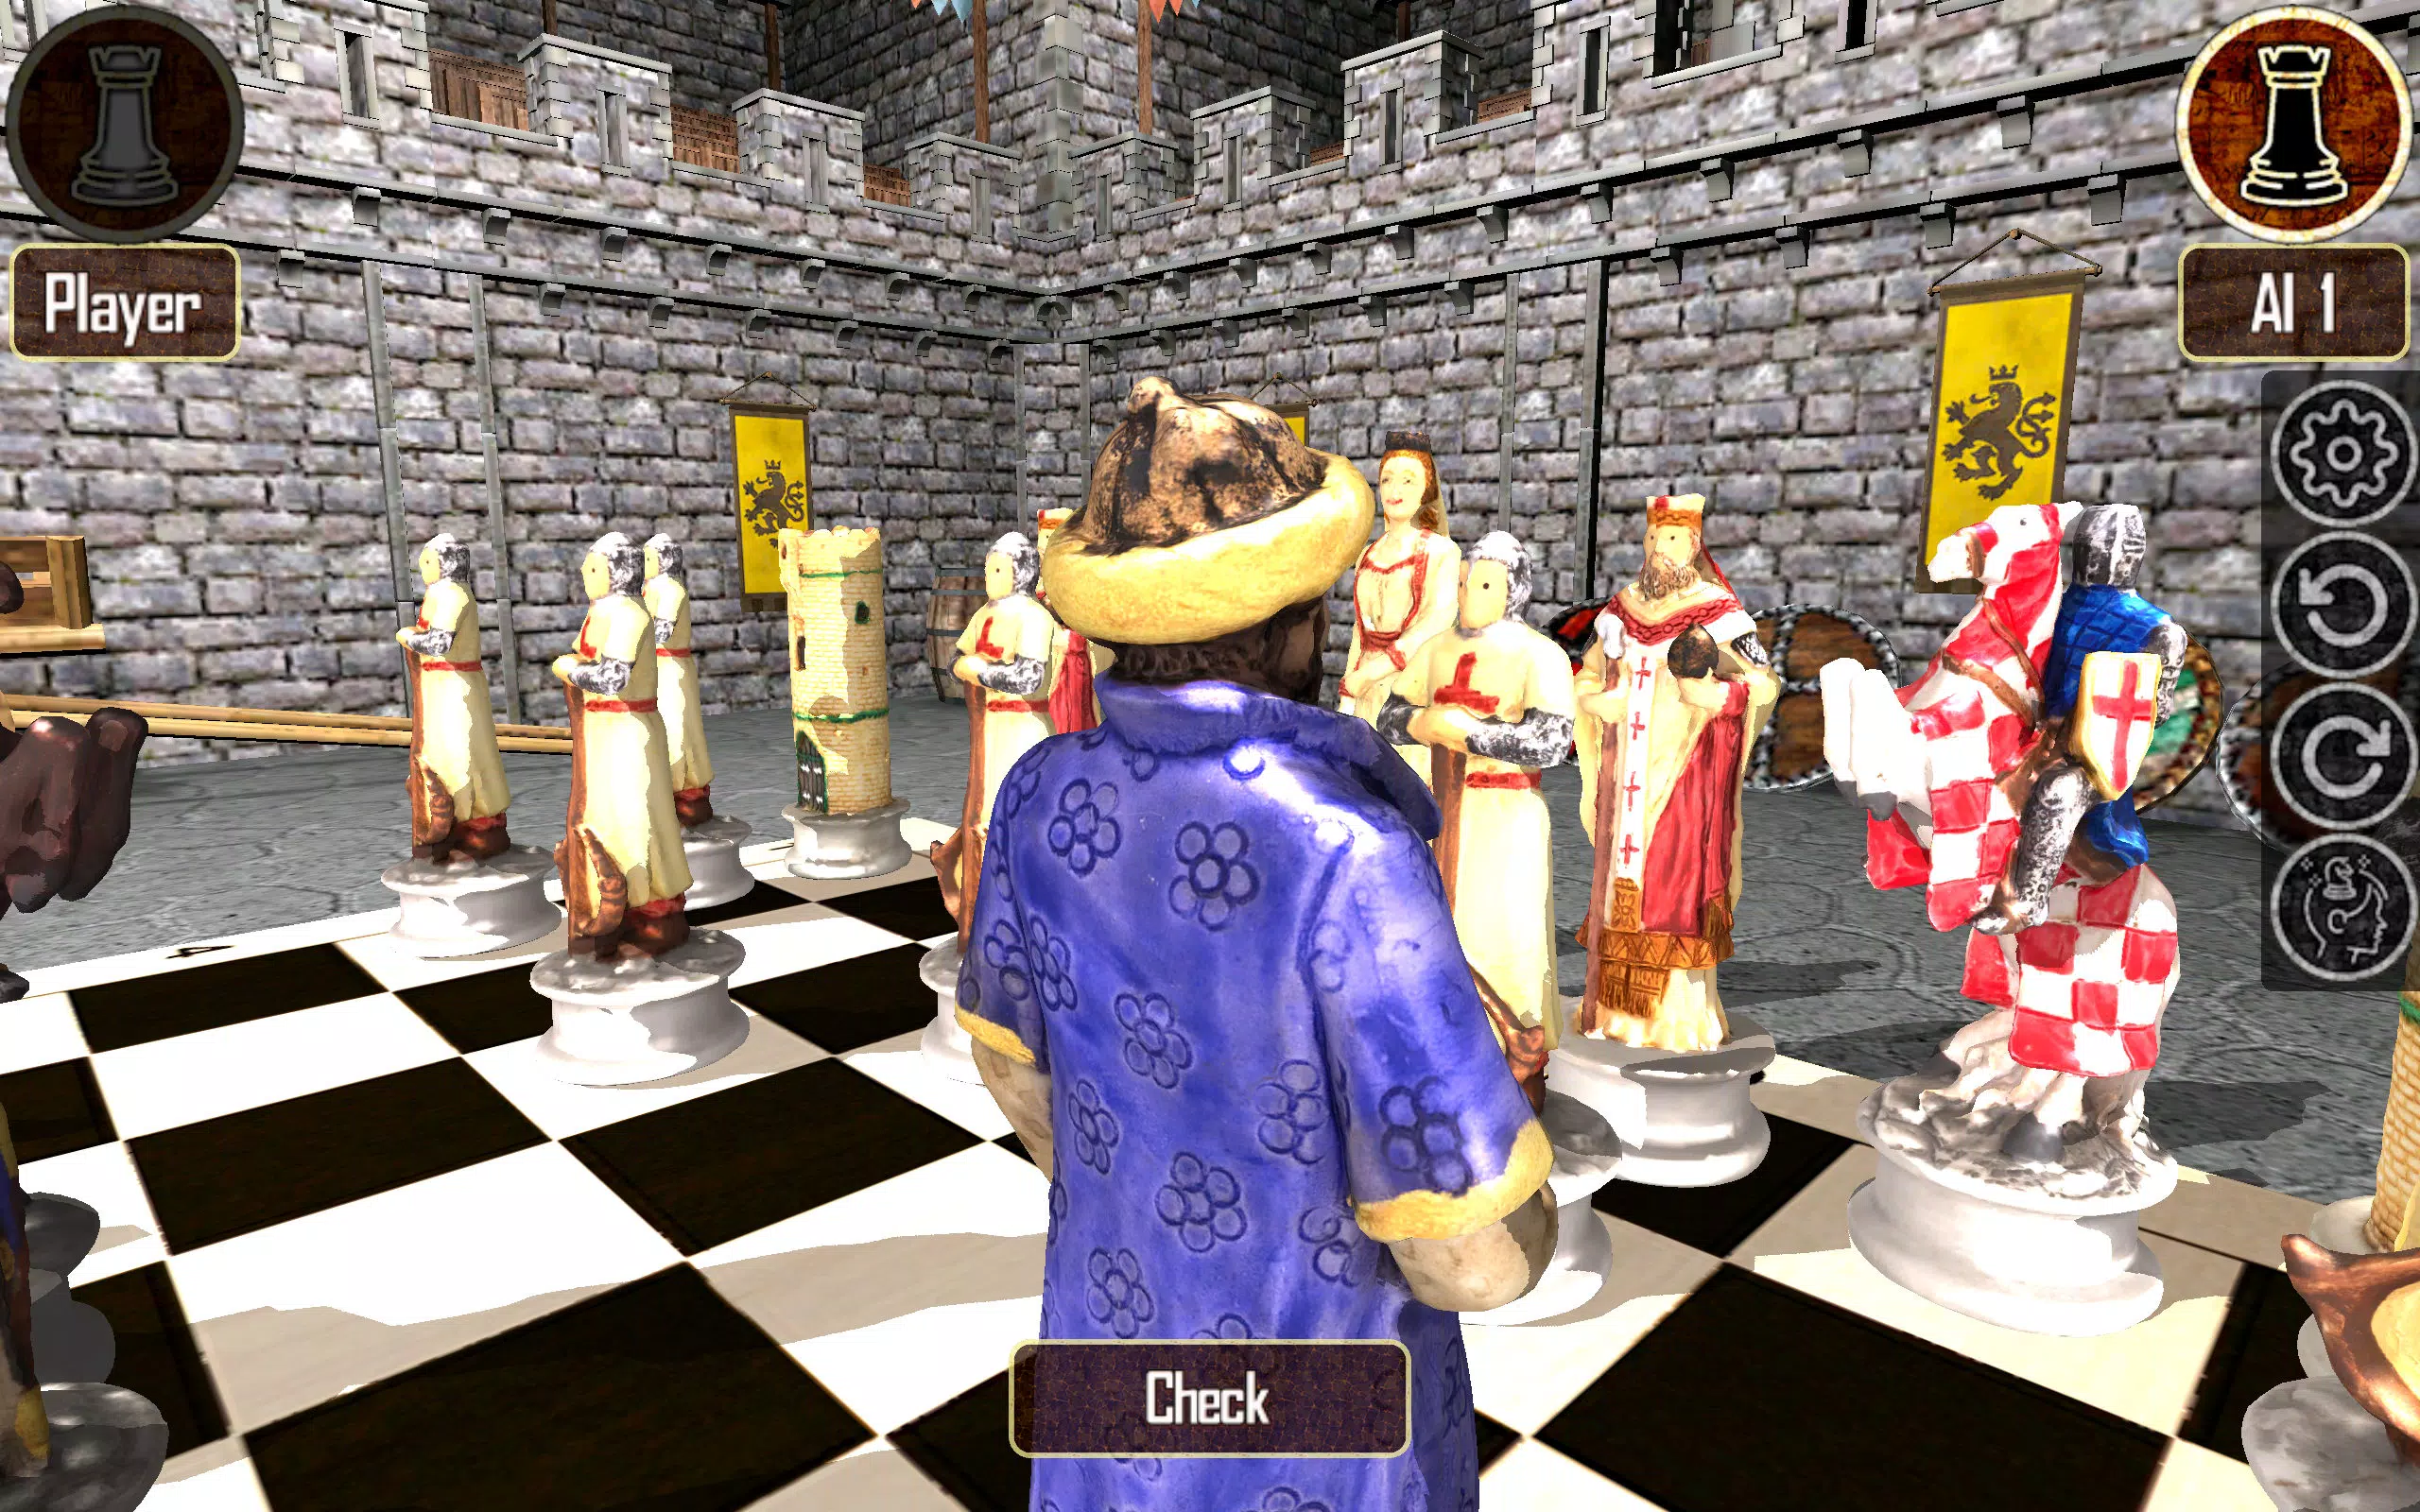 Download Chess: Chess Online Games MOD APK v3.321 for Android